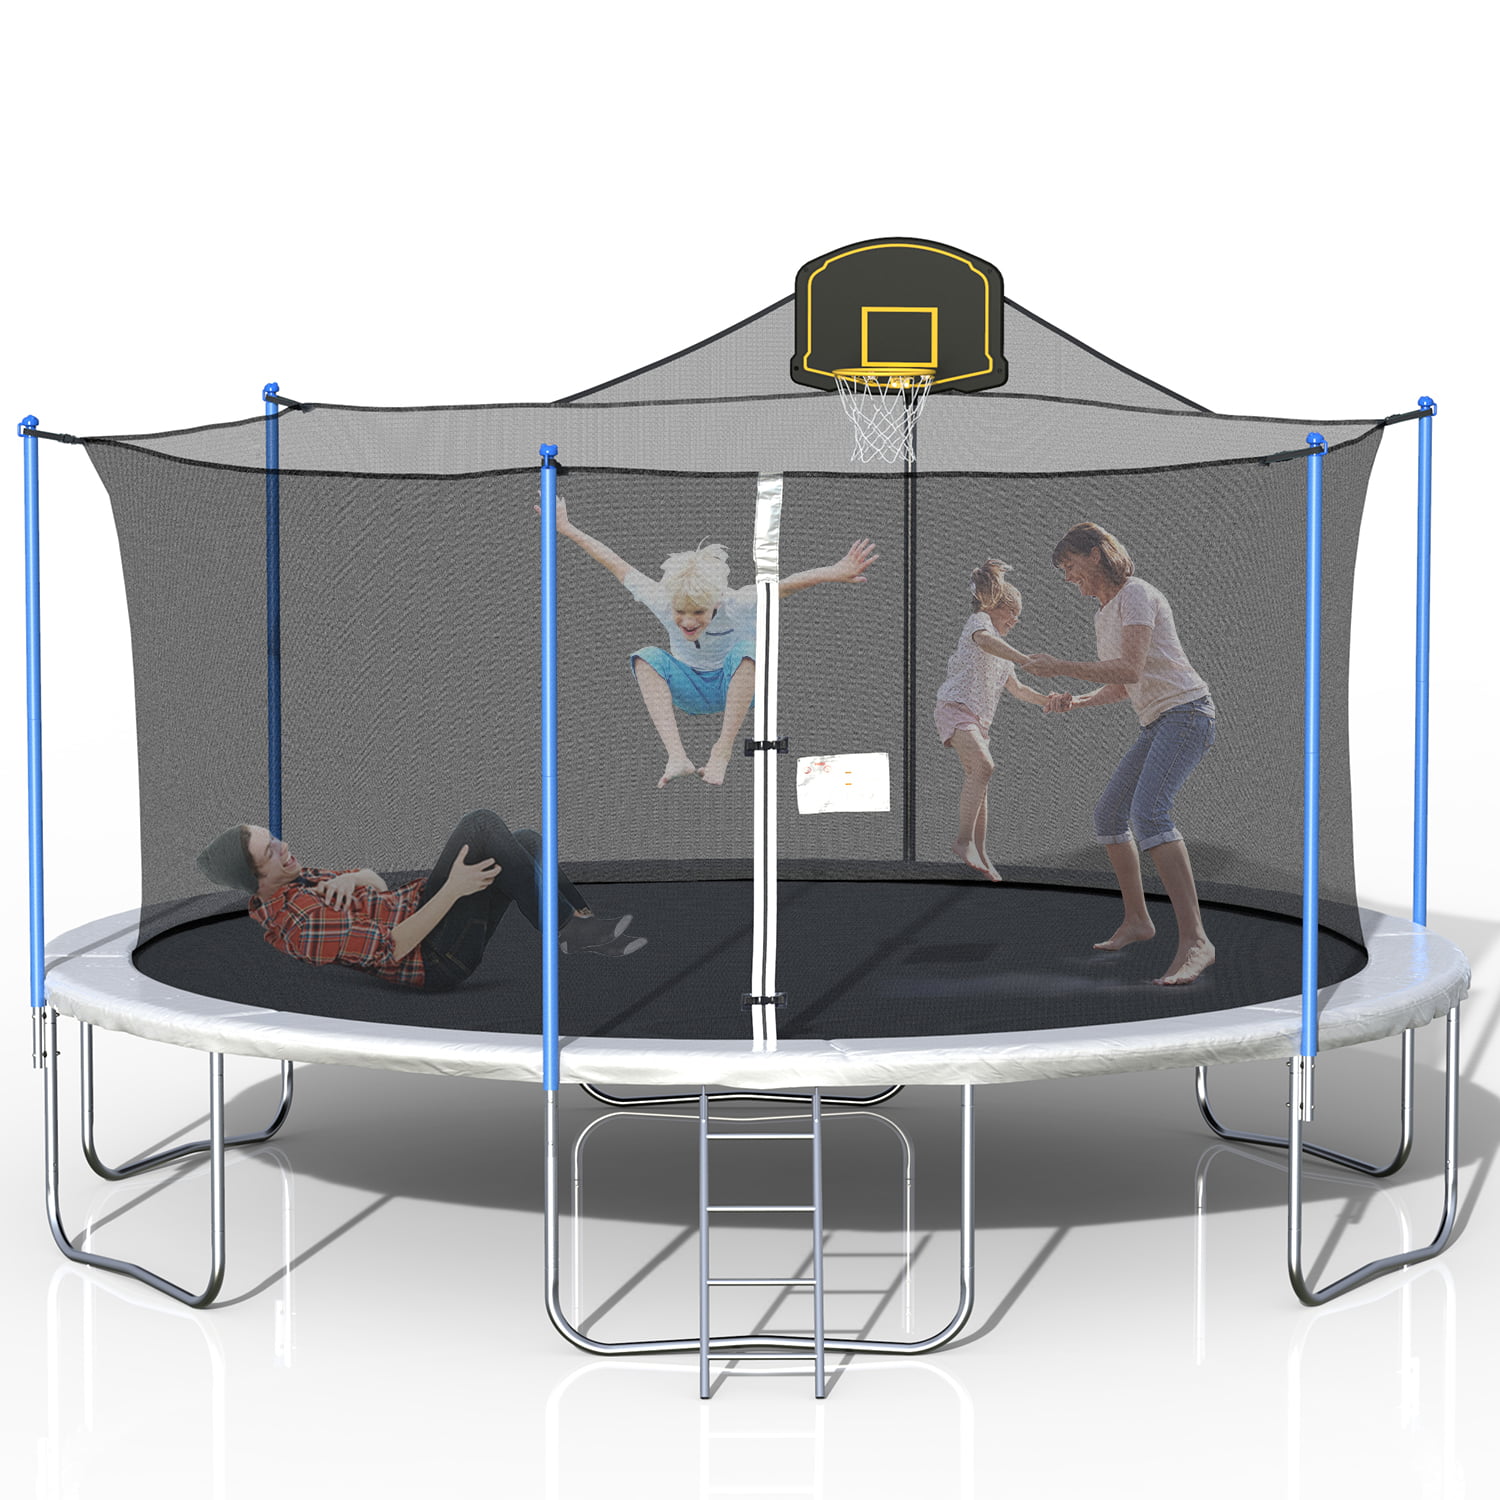 Garden trampoline with Safety Enclosure Netting and Ladder Edge Cover Jumping Mat Rocket Bunny Outdoor Trampoline Starter Kids Trampoline